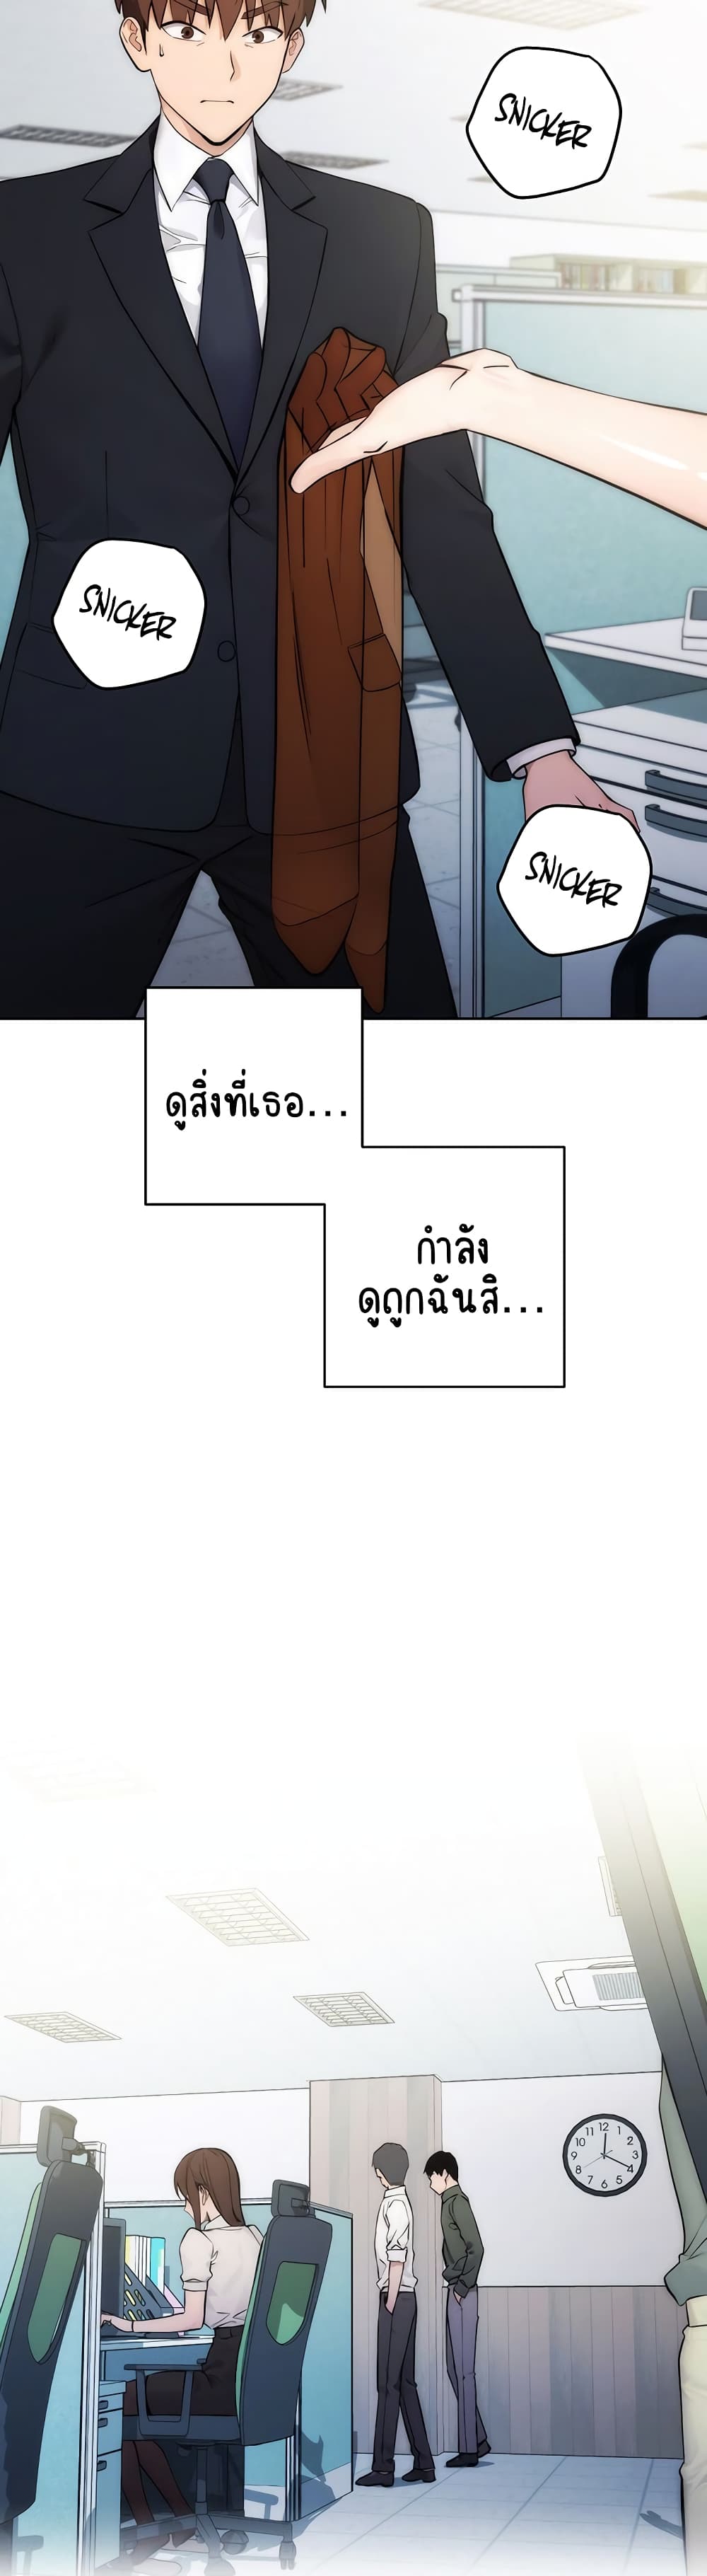 Outsider: The Invisible Man ตอนที่ 1 ภาพ 34